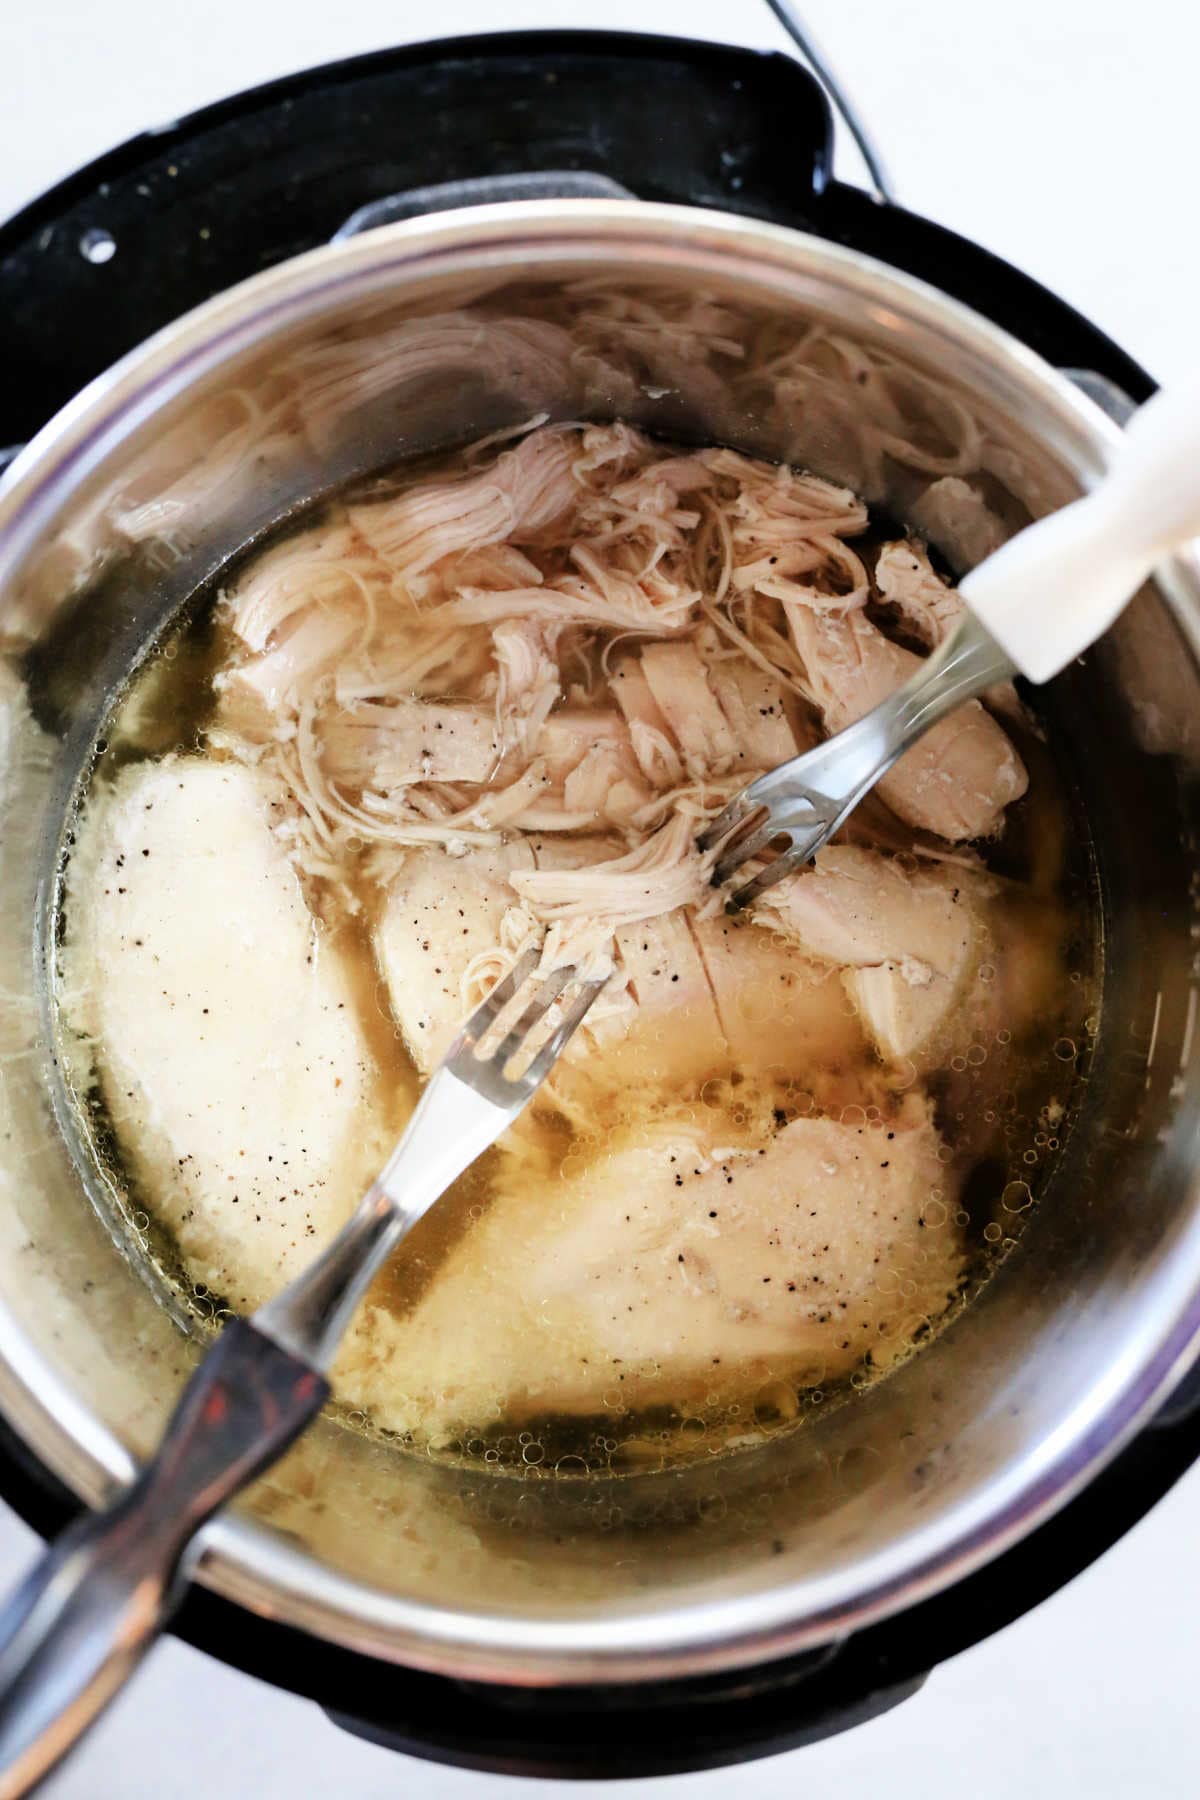 chicken cooked in a slow cooker being pulled apart with forks